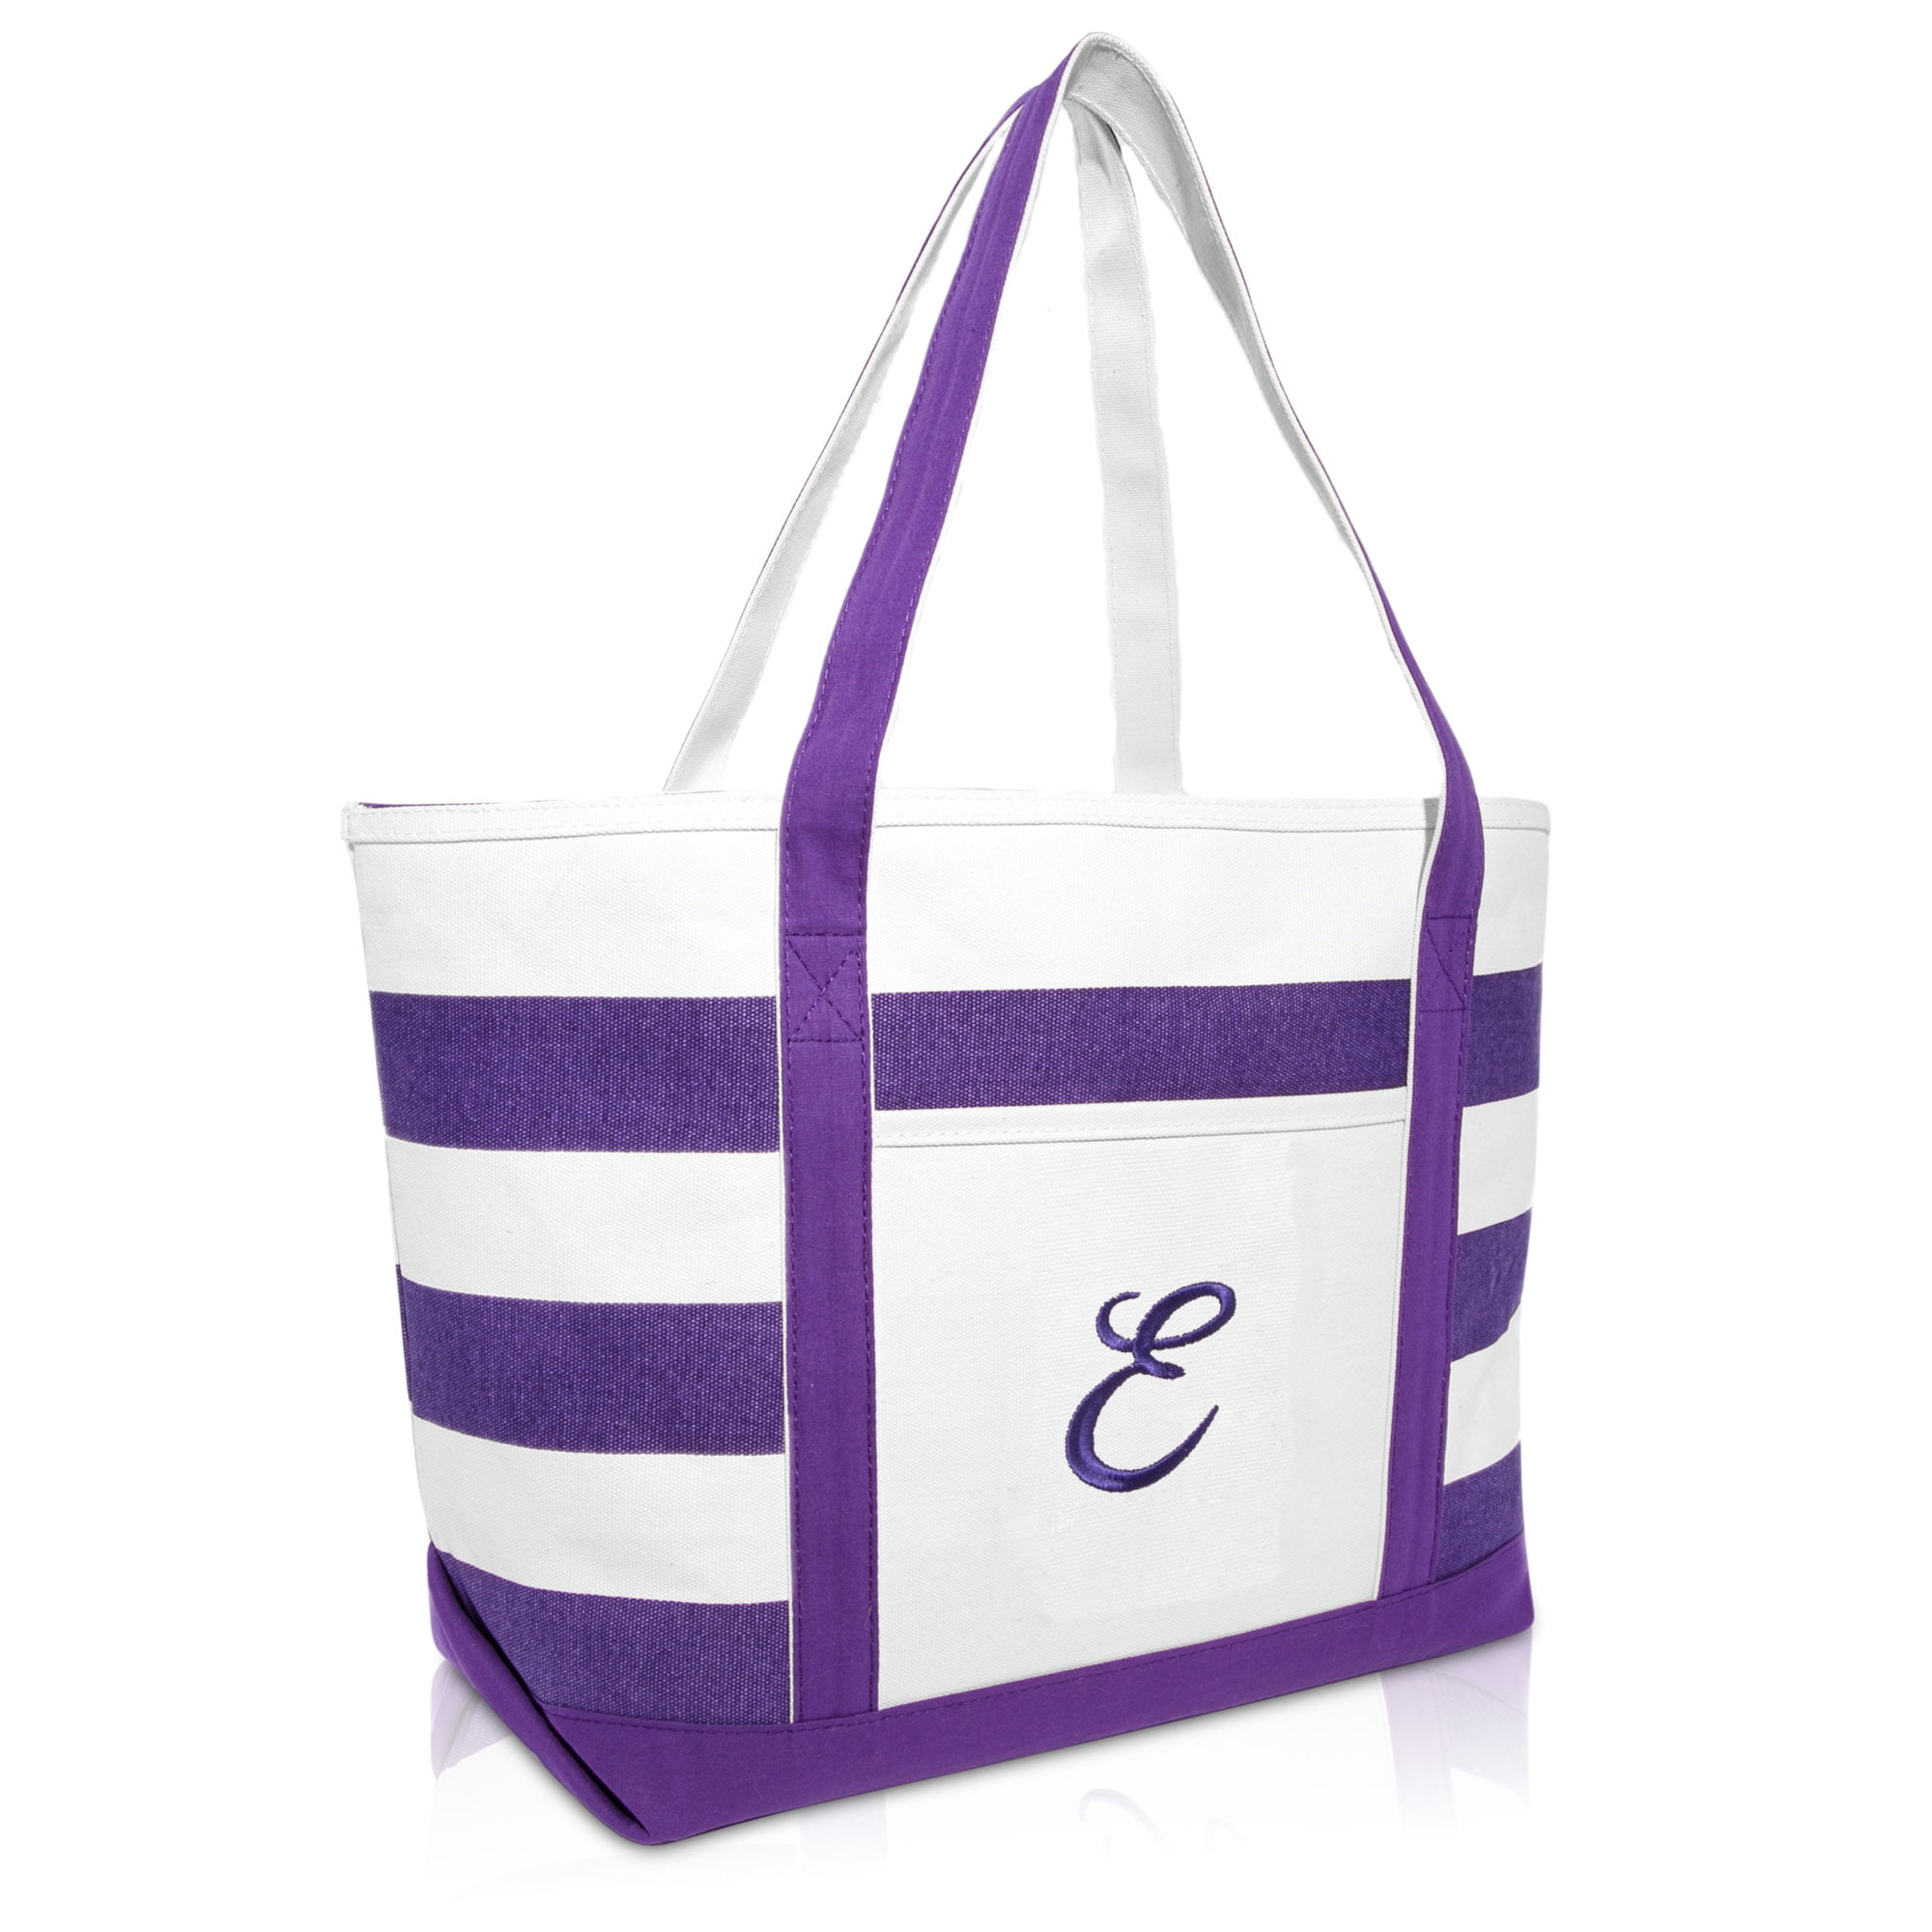 DALIX Monogrammed Beach Bag and Totes for Women Personalized Gifts Purple E - 0